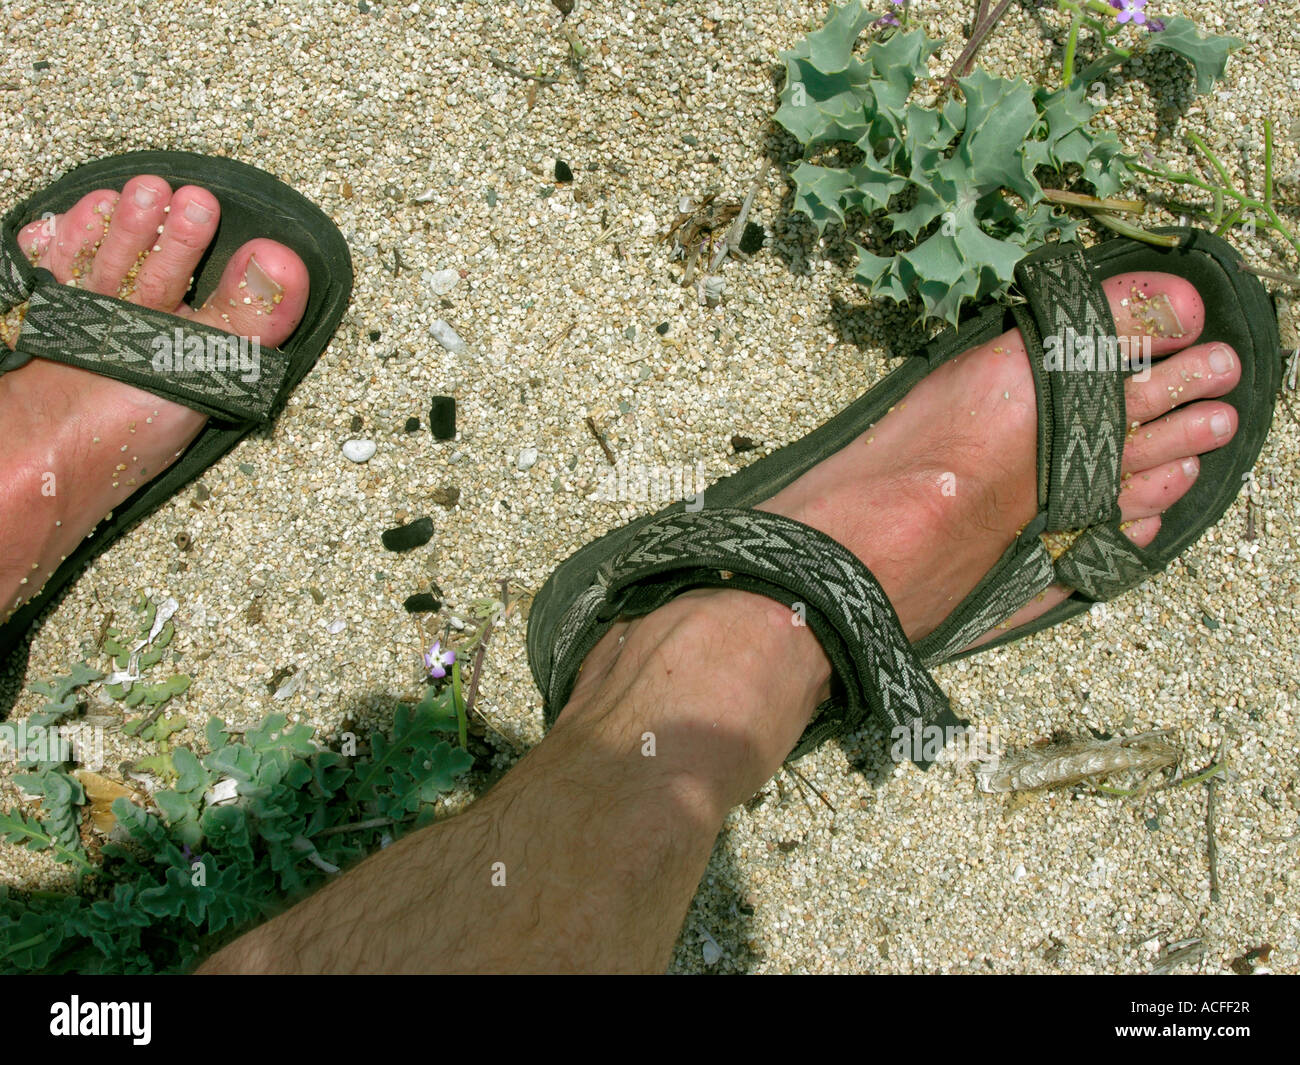 MR walking in the nature legs and feet with tracking sandals in sand Stock Photo